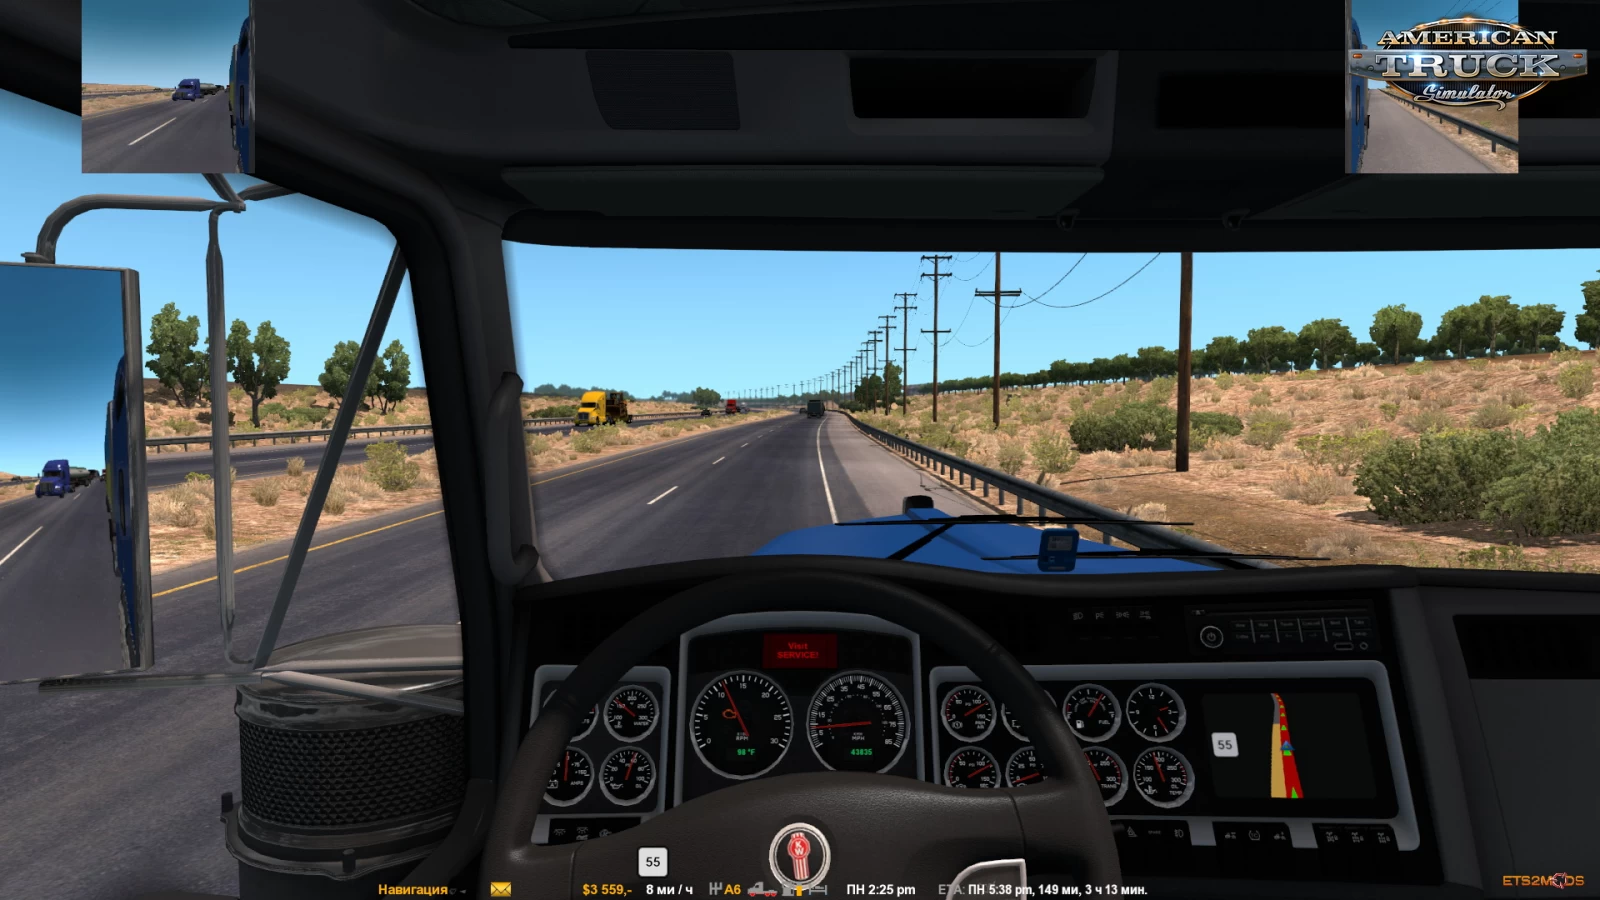 Route Advisor Mod Collection v6.03 for ETS2 and ATS (1.43.x)